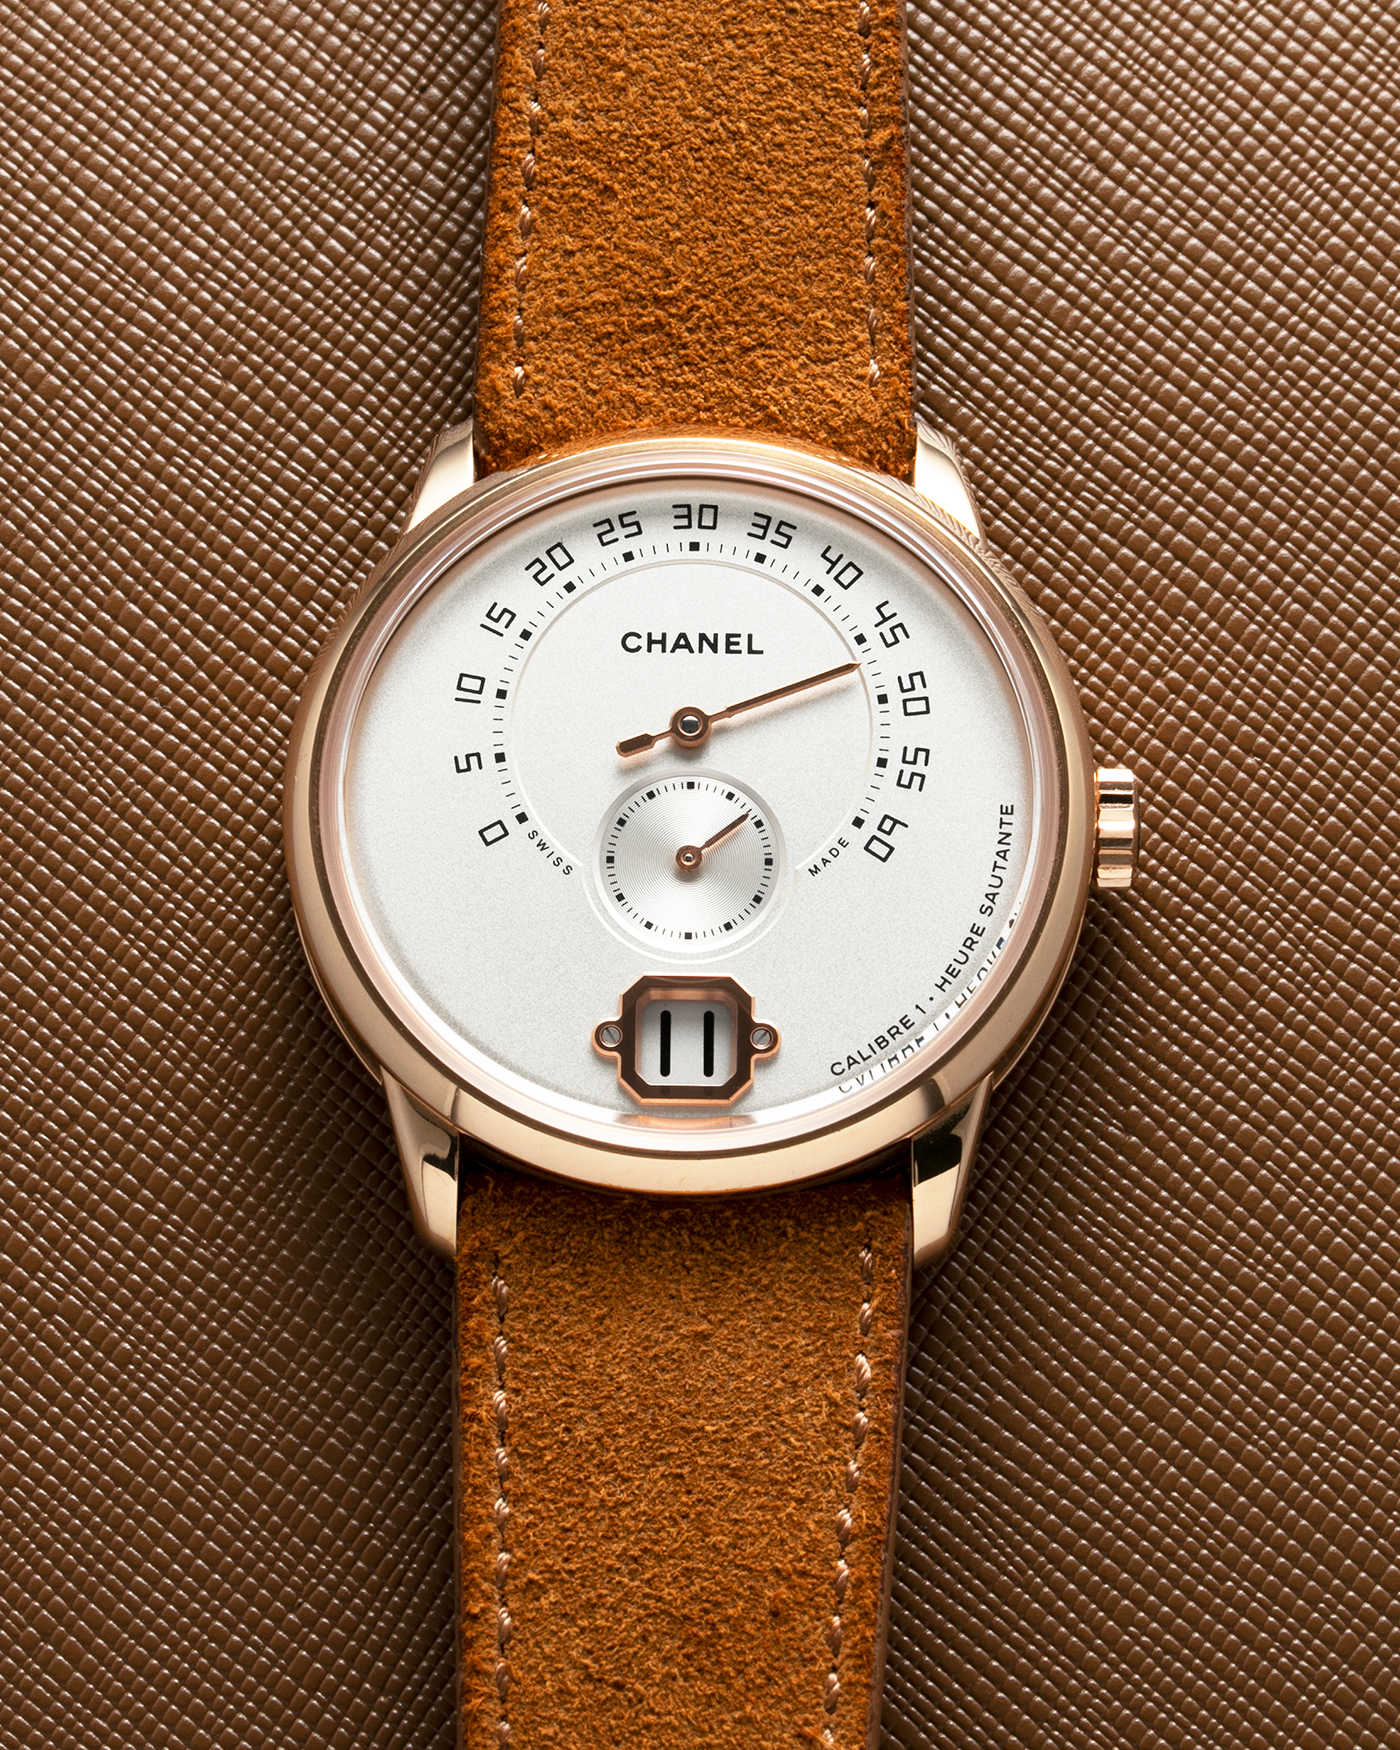 Brand: Chanel Year: 2016 Model: Monsieur De Chanel Jump Hour H6596 Material: 18-carat Beige Gold Movement: In-house Chanel Cal. 1, Manual-Winding  Case Diameter: 40mm Bracelet/Strap: Tanned Suede Strap from Rios 1931 with 18-carat Beige Gold Signed Deployant Clasp